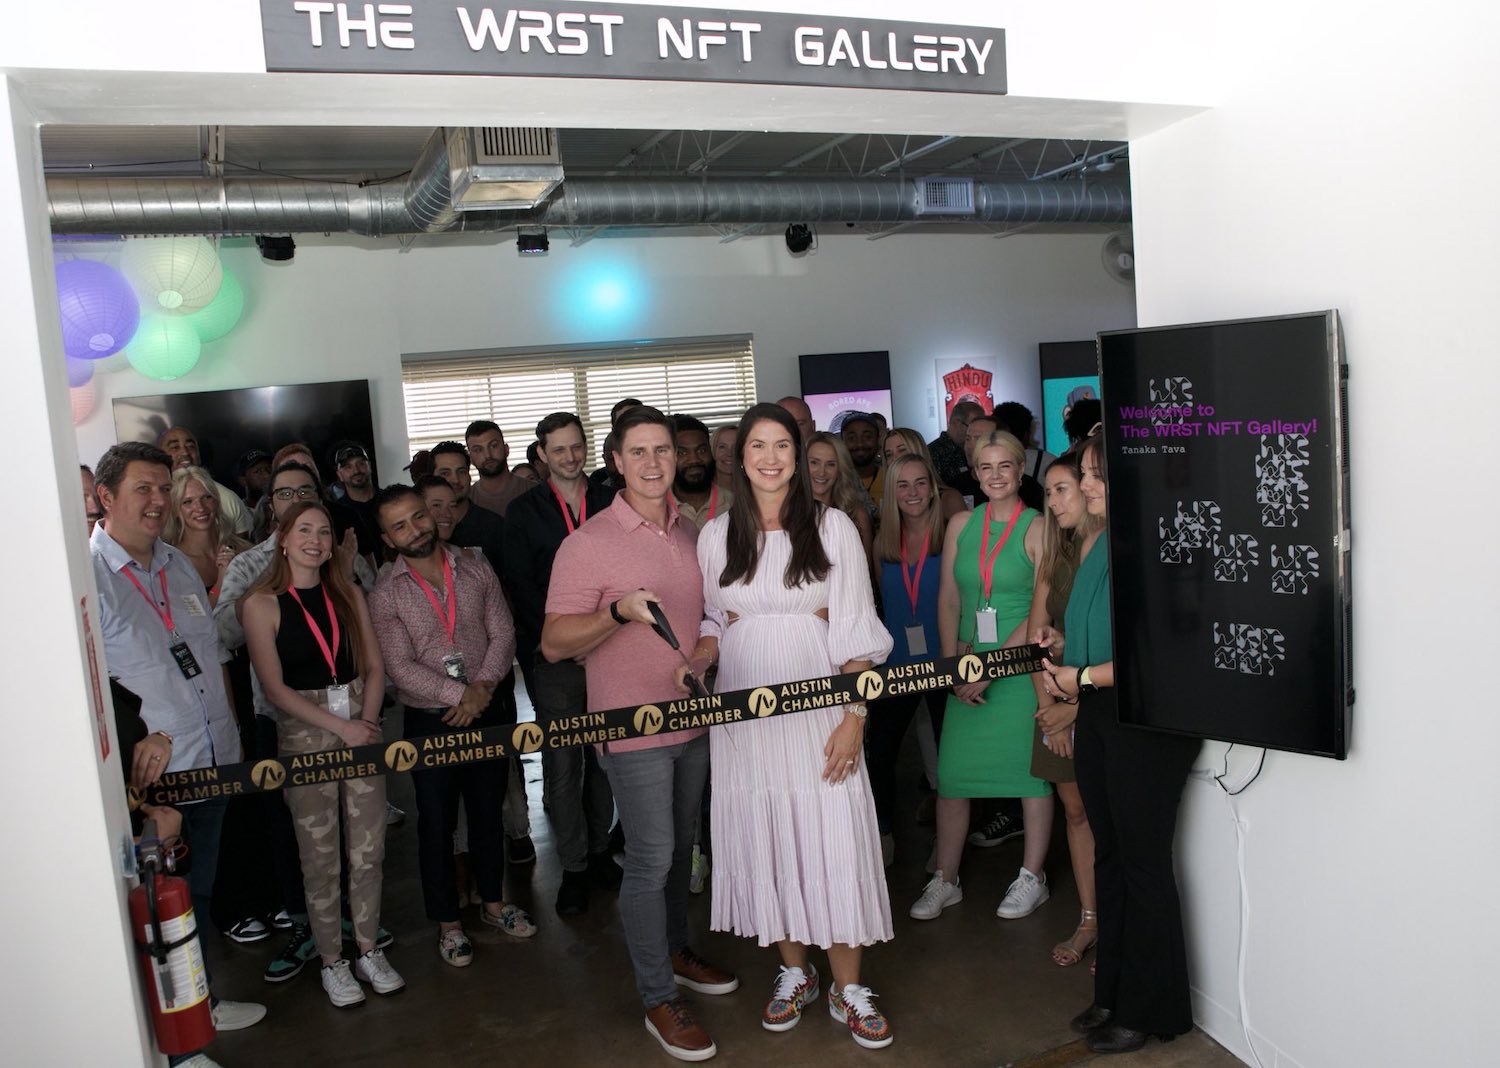 WRST Collabs co-founders Matt Wursta, left, and Deanna Wursta hold a ribbon-cutting event for The WRST NFT Gallery on June 11.